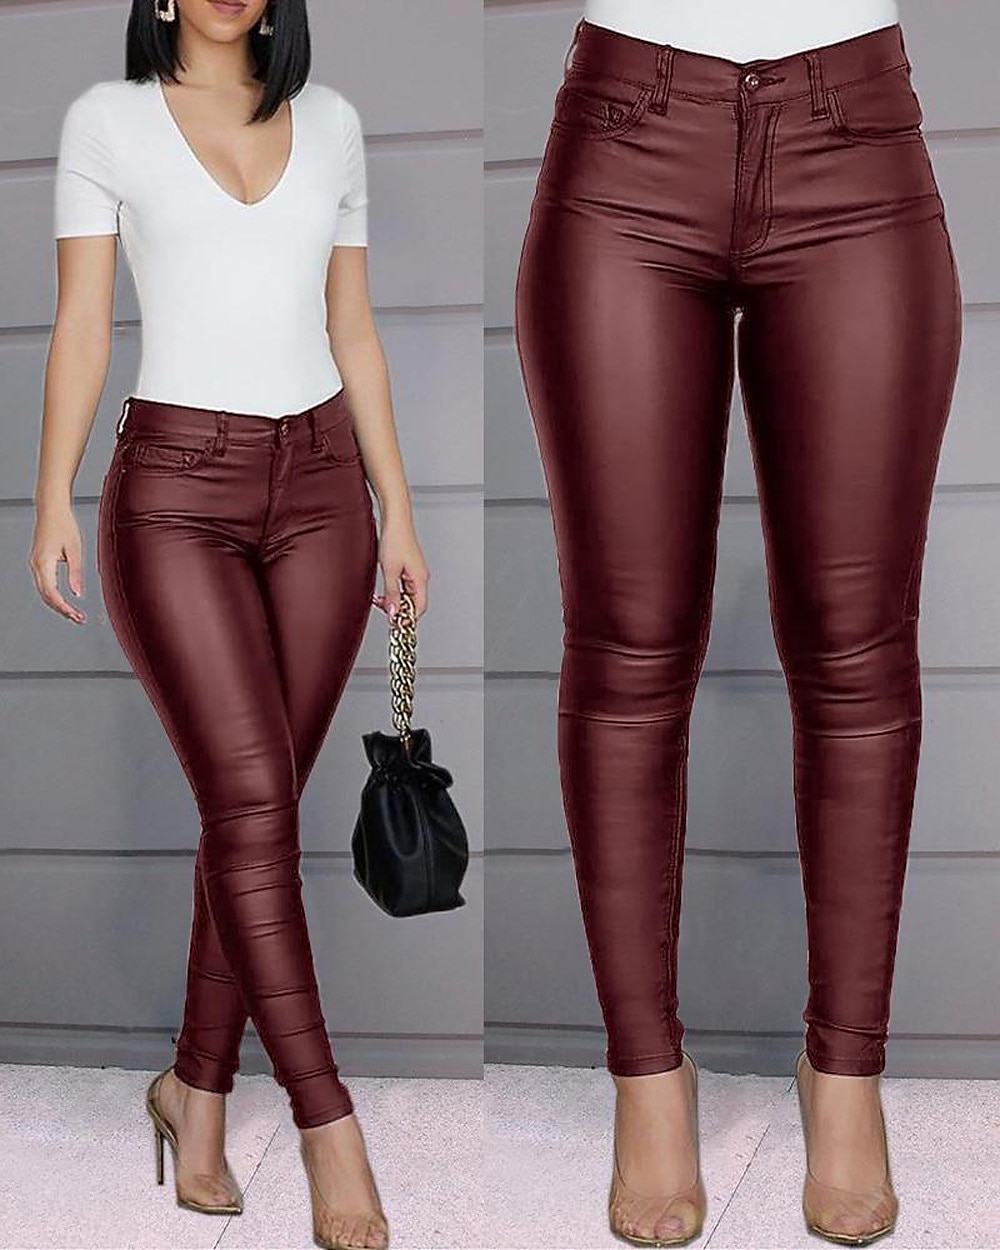 Women's Skinny Leather Pants Pants Trousers Faux Leather Plain Side Pockets  Ankle-Length Stretchy Fashion Party Casual Daily claret Black S M 2024 -  $32.99